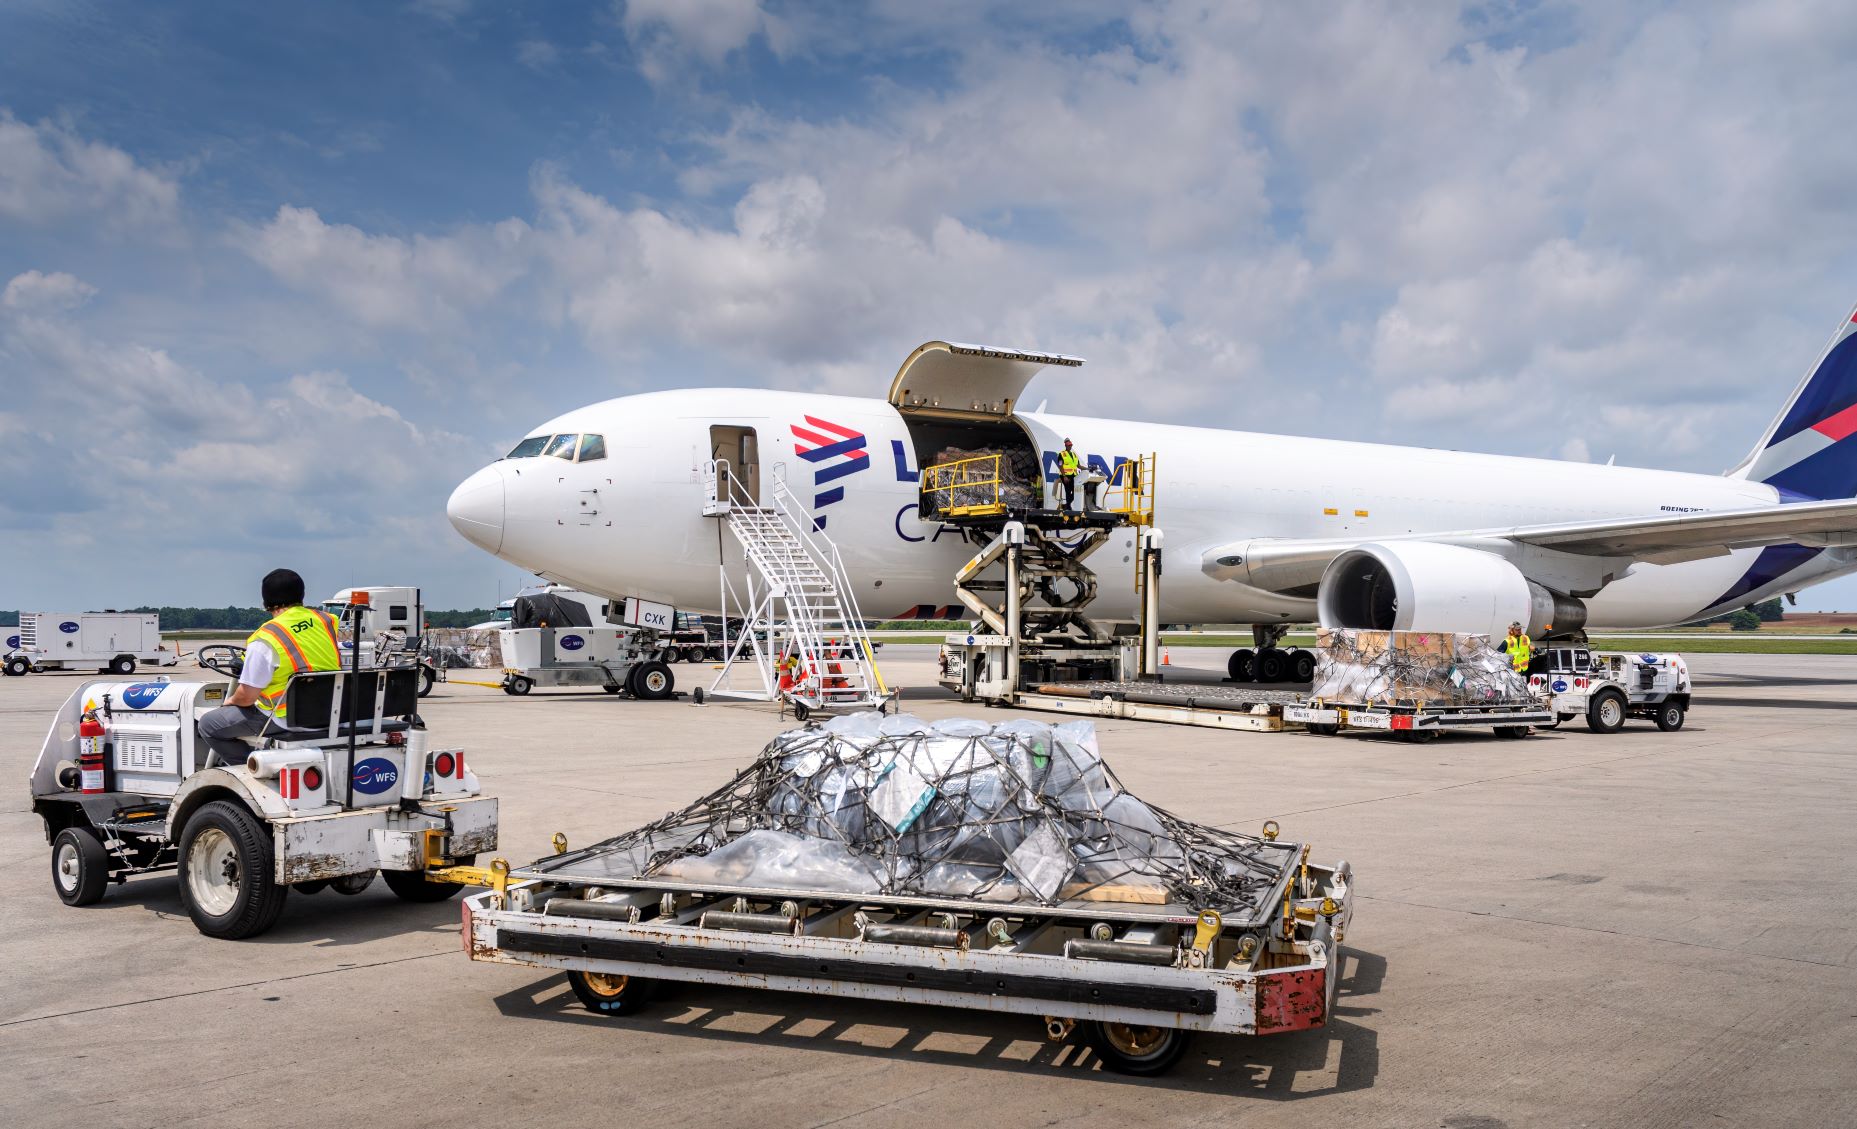 Avion Express set to launch US cargo services